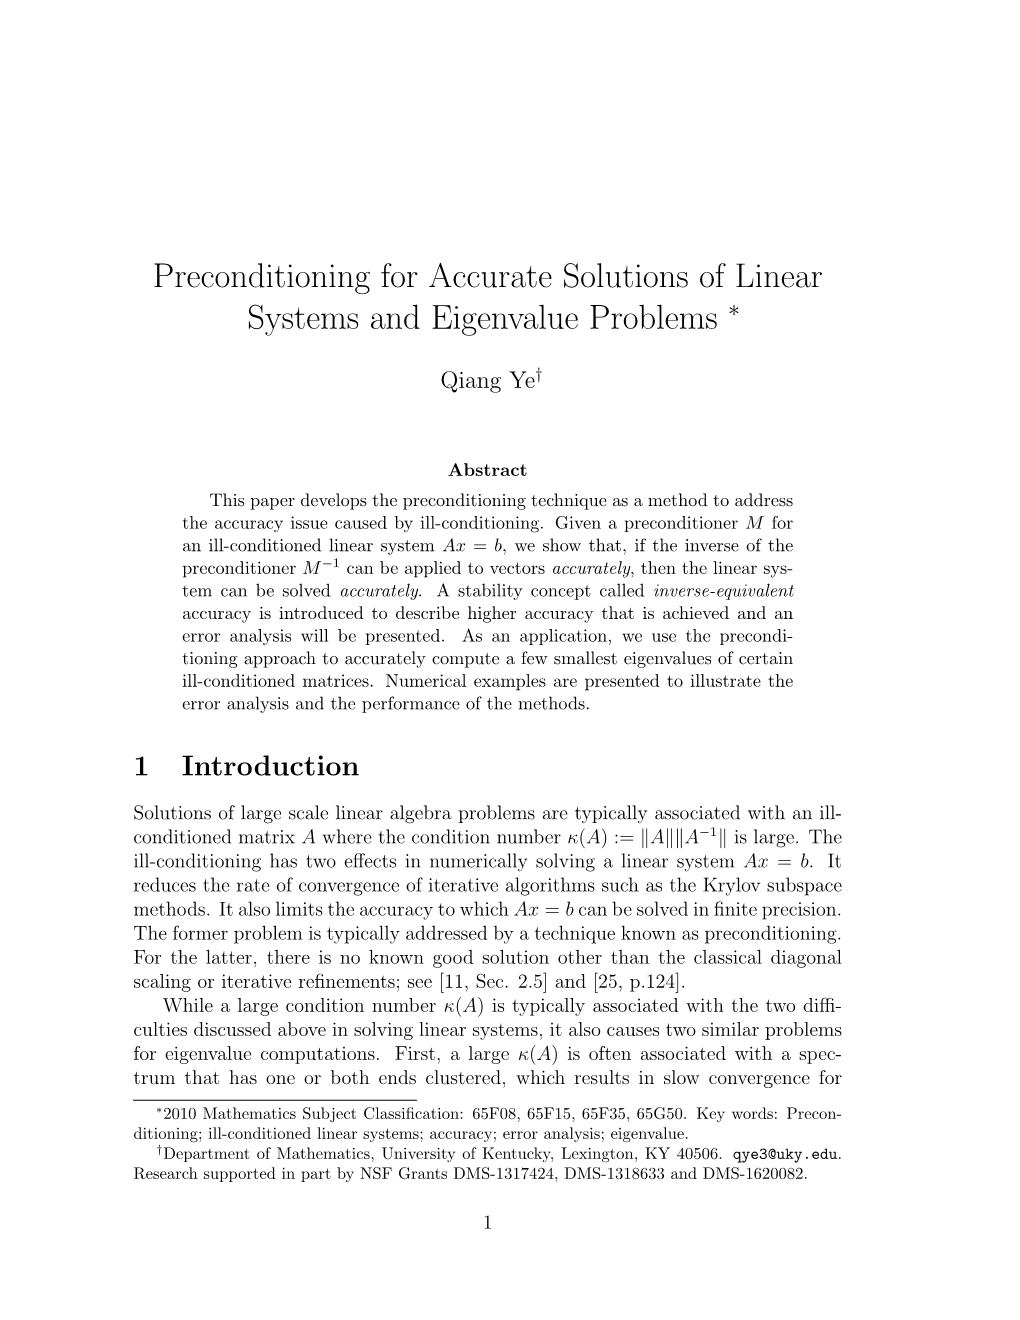 Preconditioning for Accurate Solutions of Linear Systems and Eigenvalue Problems ∗